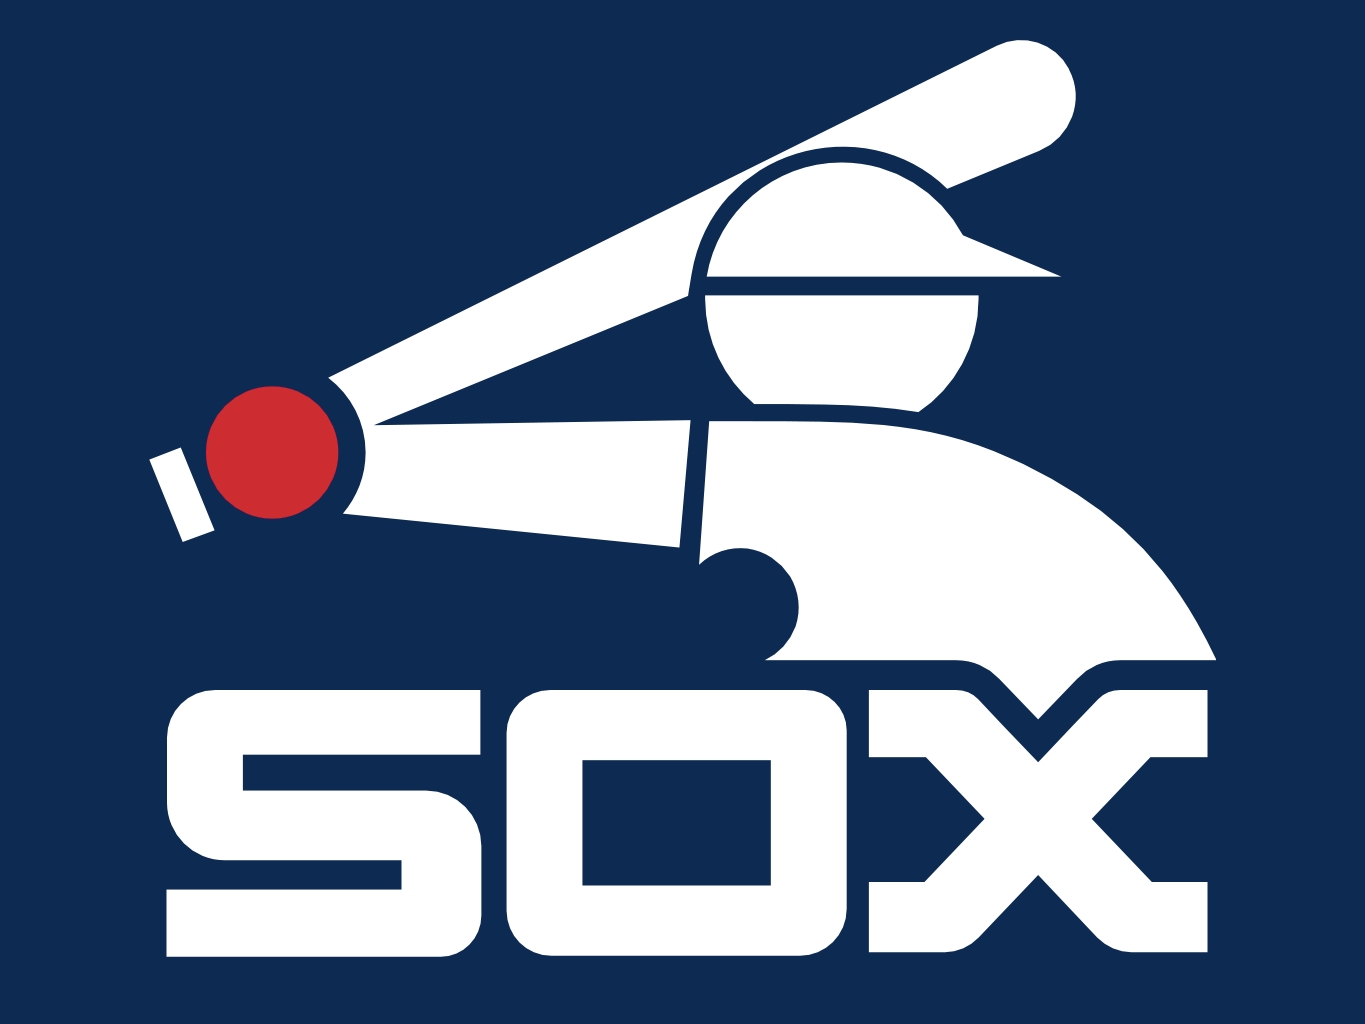 2020 Chicago White Sox Predictions | MLB Betting Season Preview & Odds